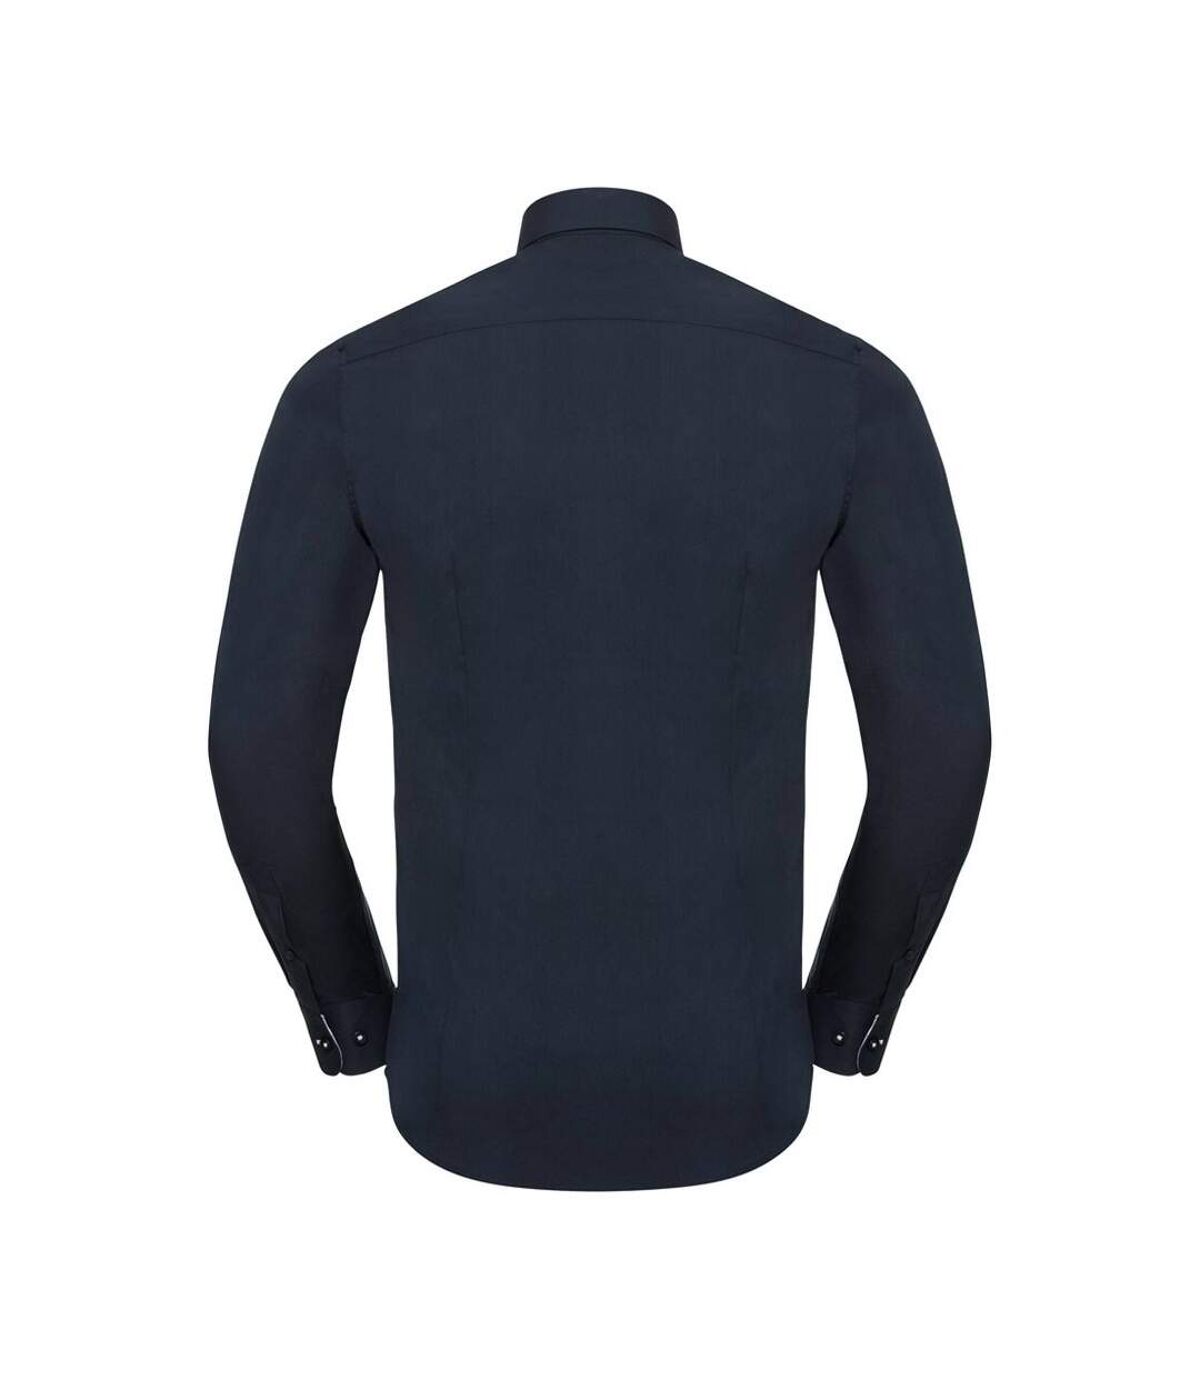 Russell Collection Mens Long Sleeve Contrast Ultimate Stretch Shirt (Bright Navy/Oxford Blue) - UTPC3683